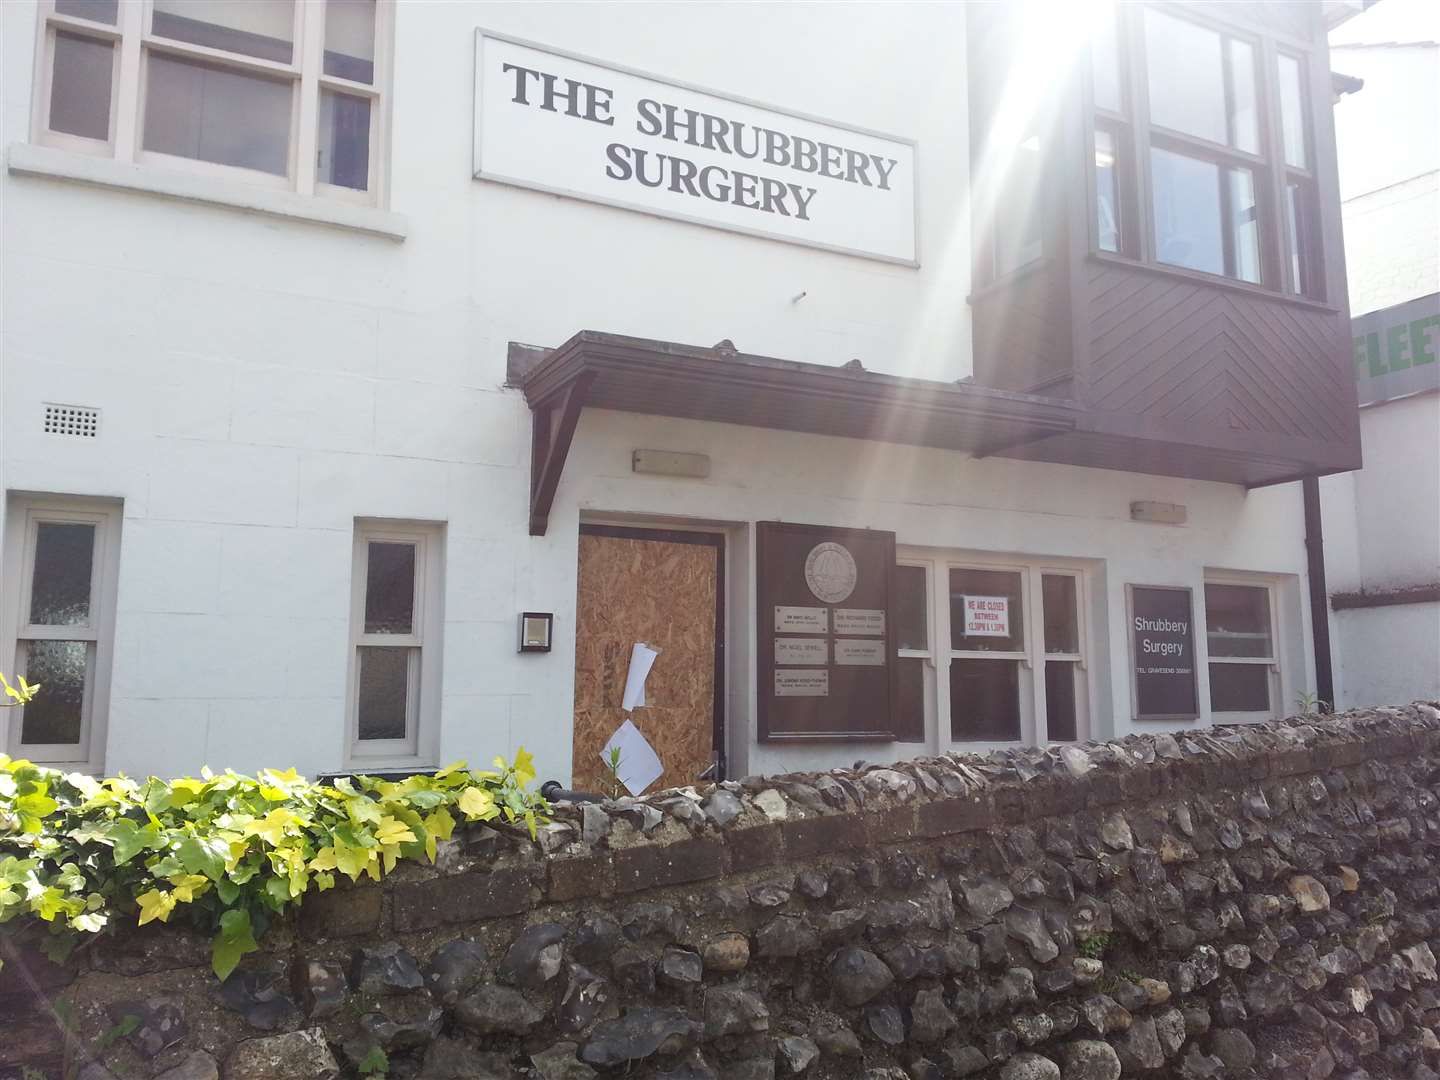 A blaze broke out at the Shrubbery Surgery in Northfleet